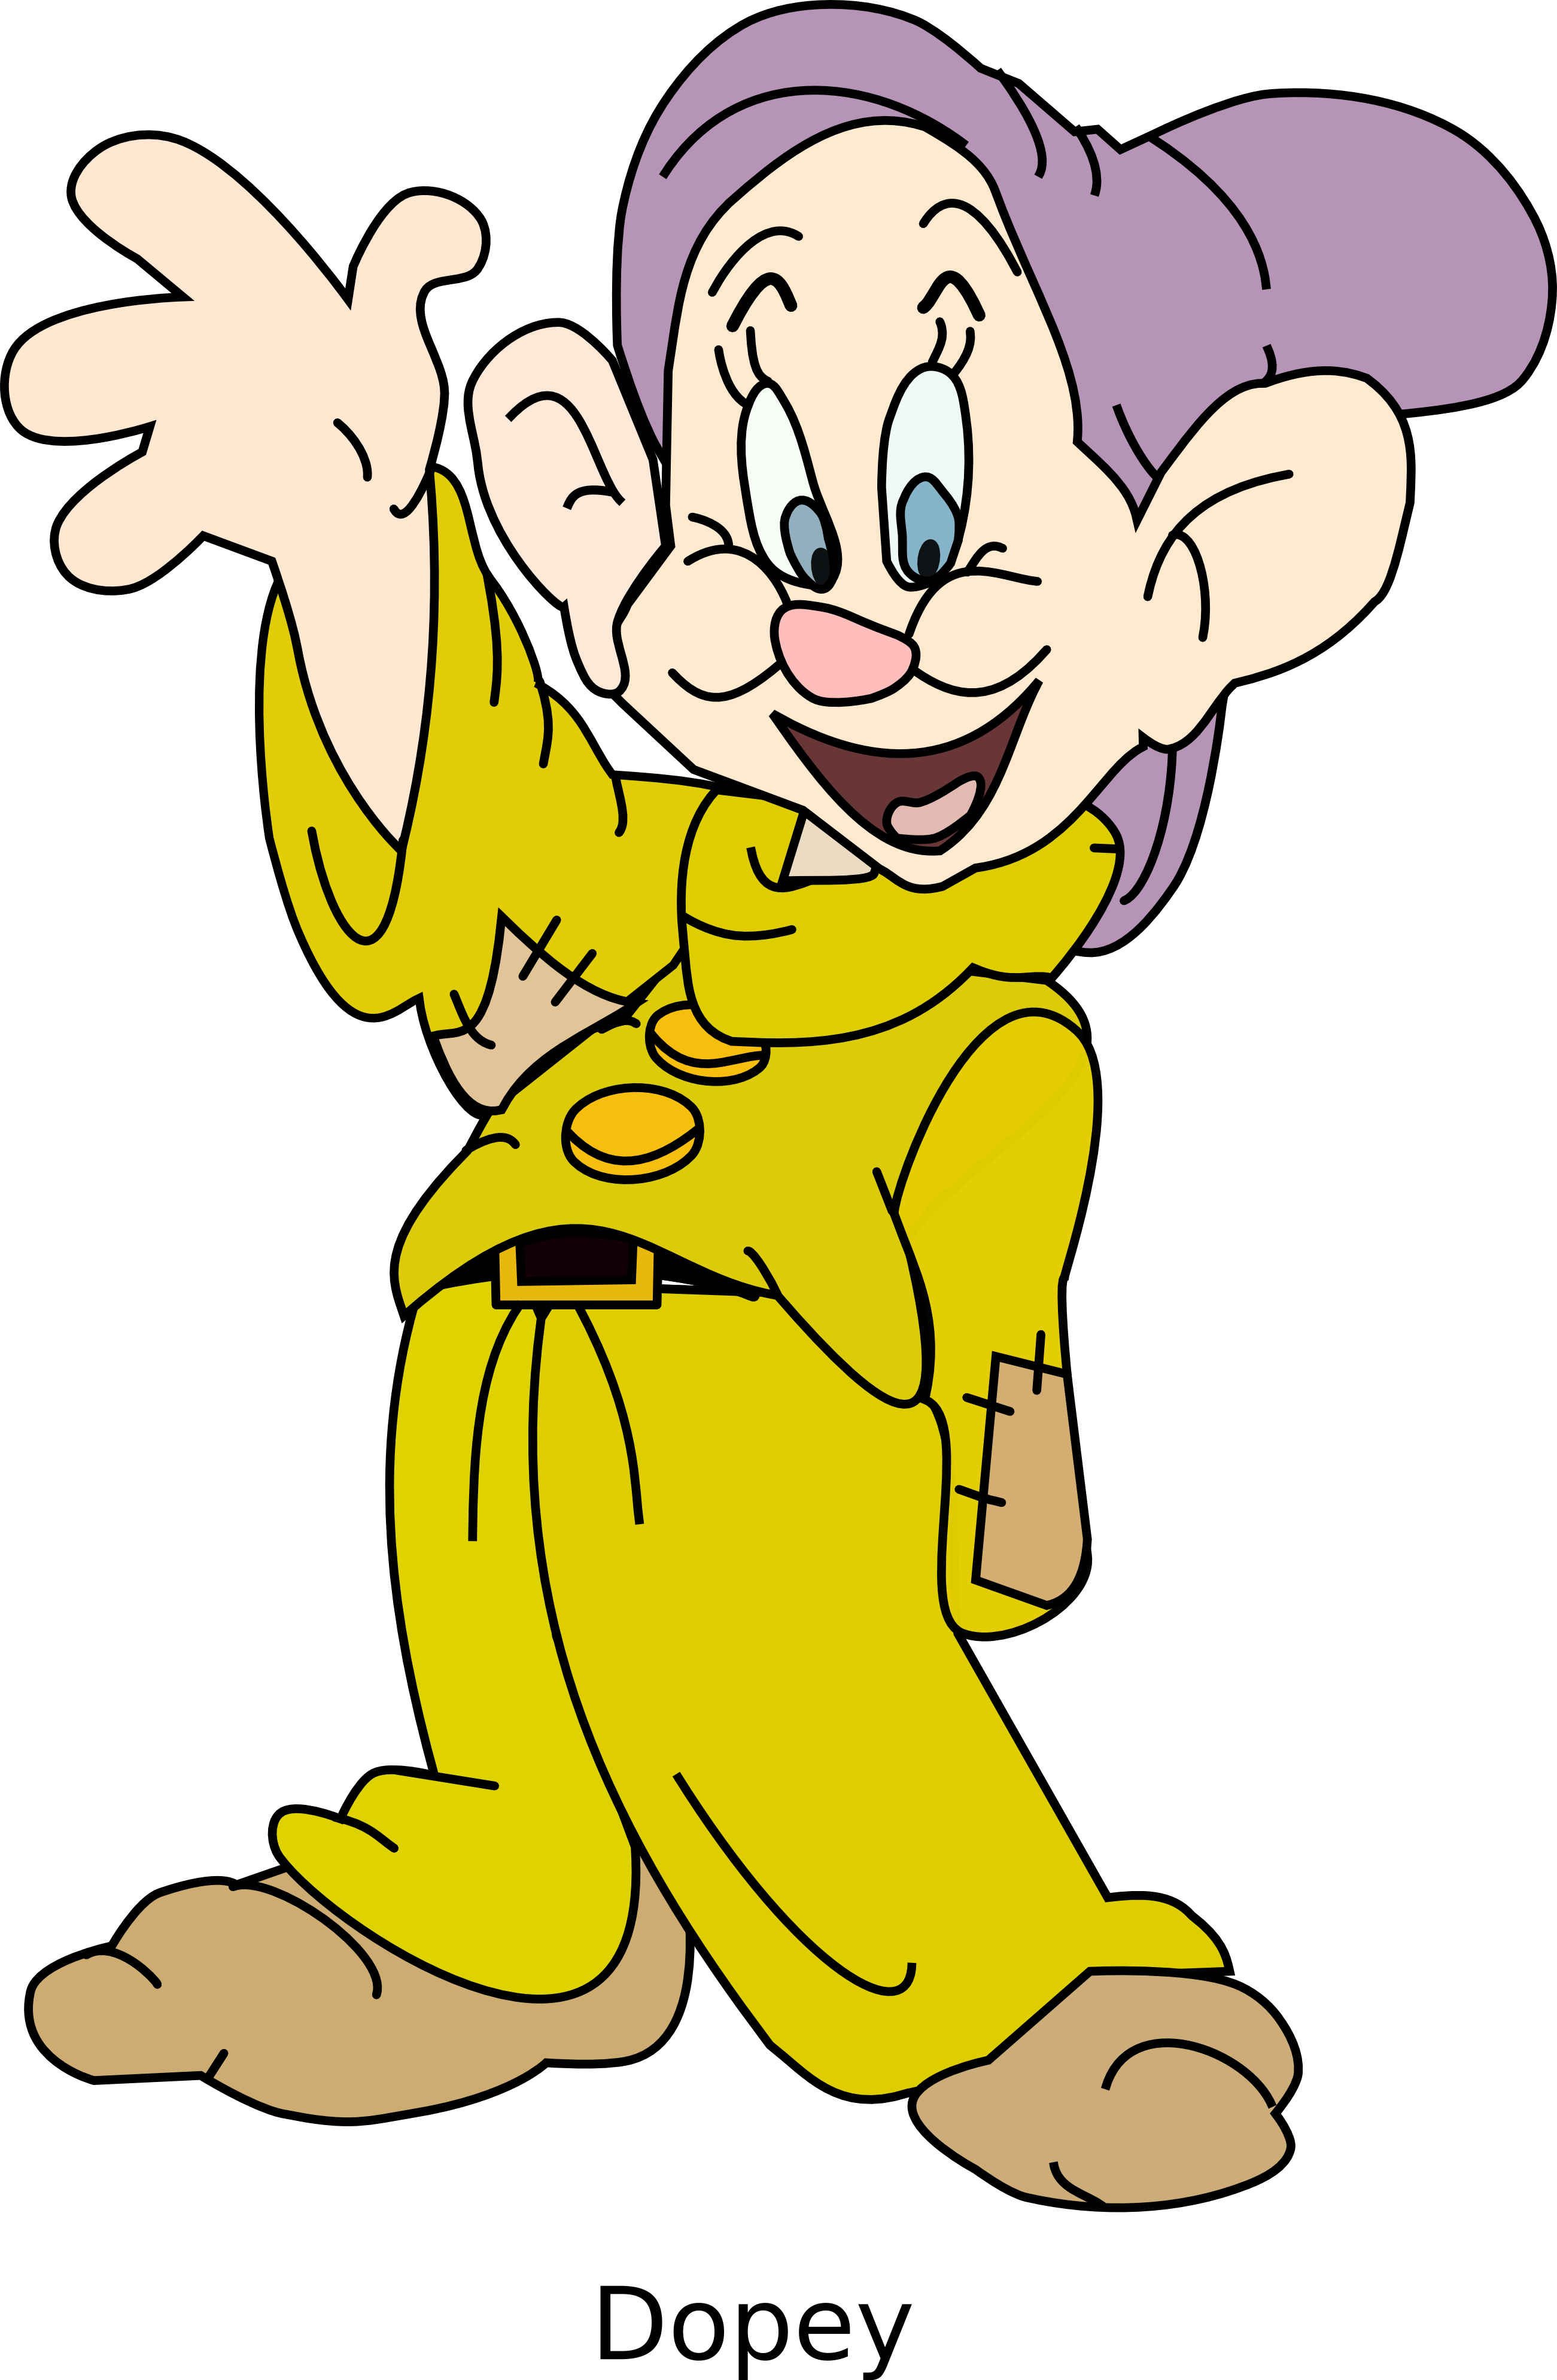 Original Size At 2602 × 3977 - Dopey, Transparent background PNG HD thumbnail